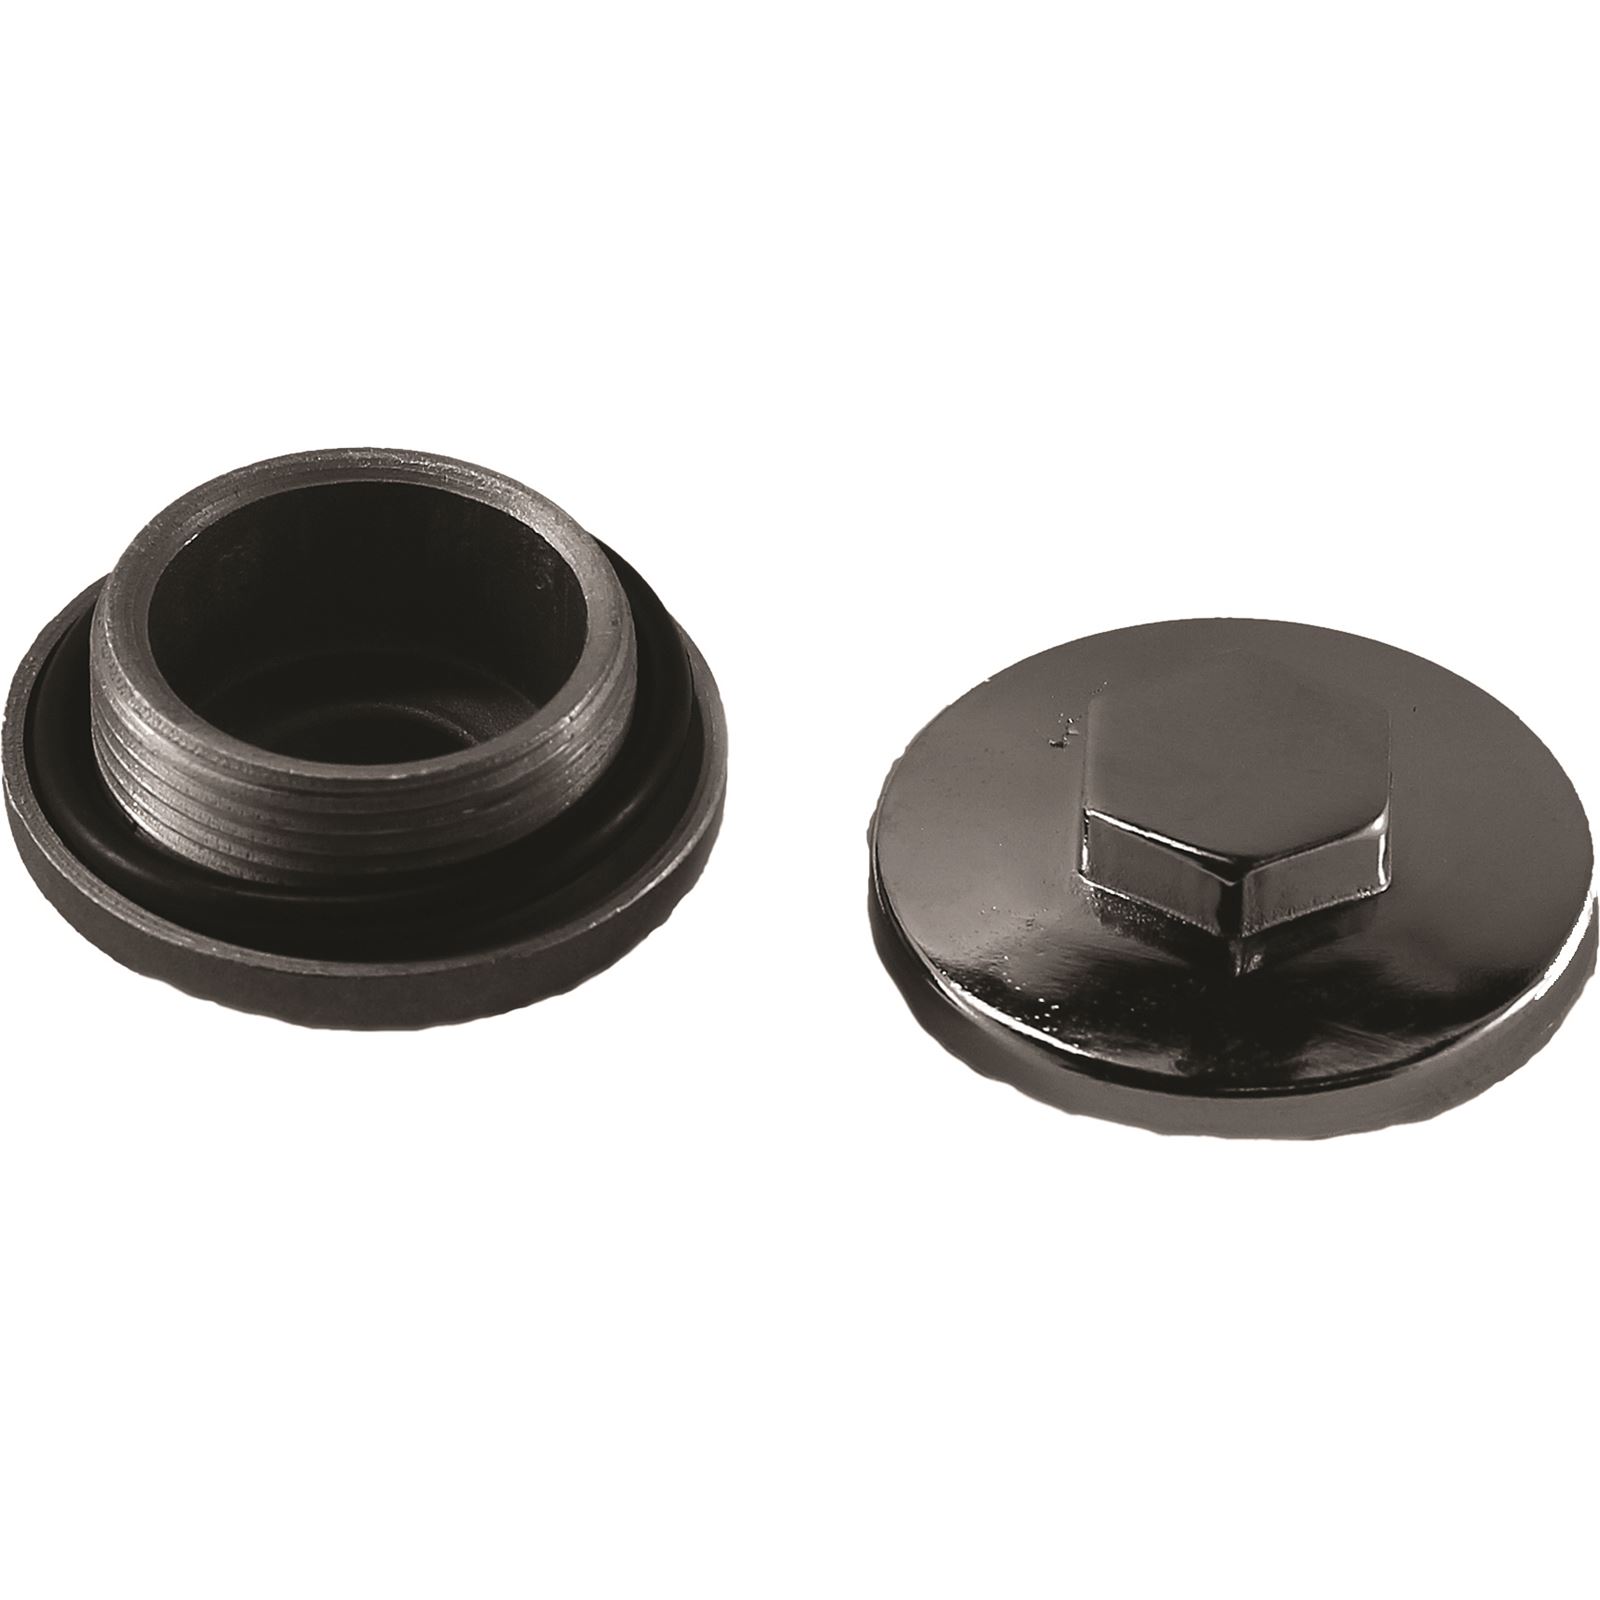 Outside Cylinder Head/Rocker Cover Inspection Cap